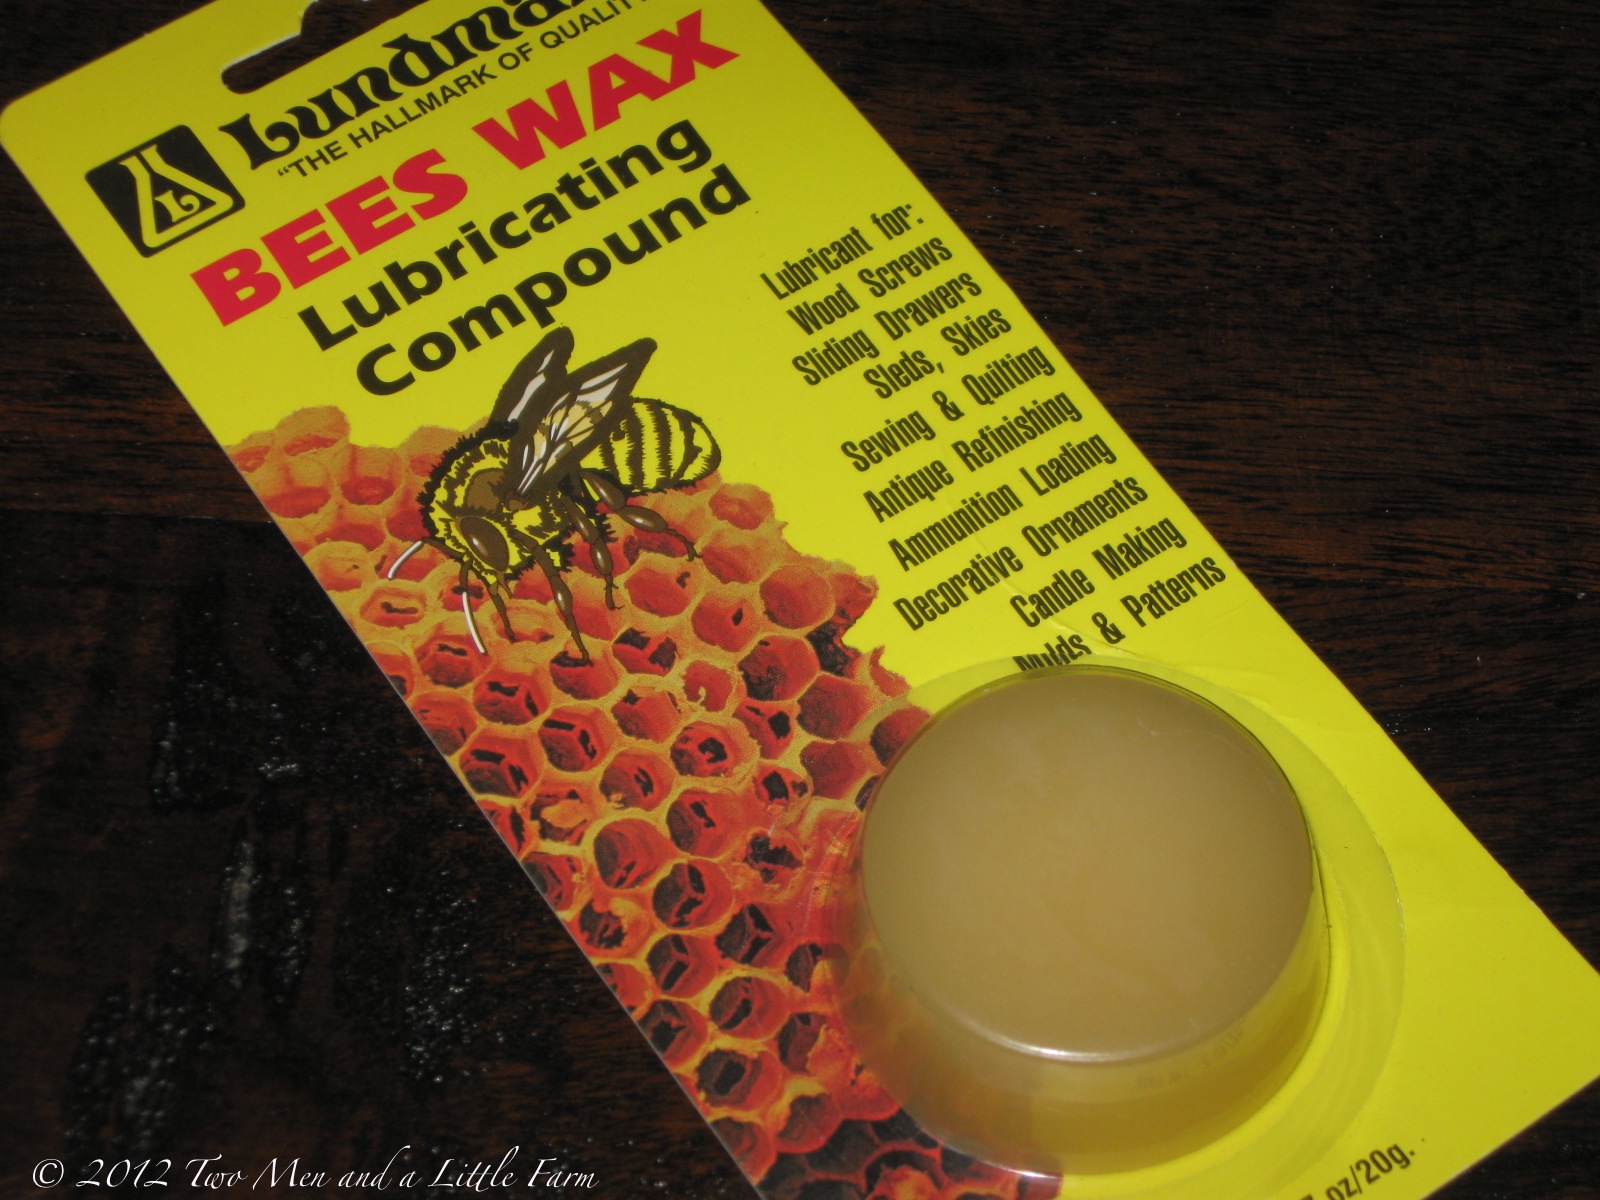 Two Men and a Little Farm: BEES WAX LUBRICATING COMPOUND BY LUNDMARK